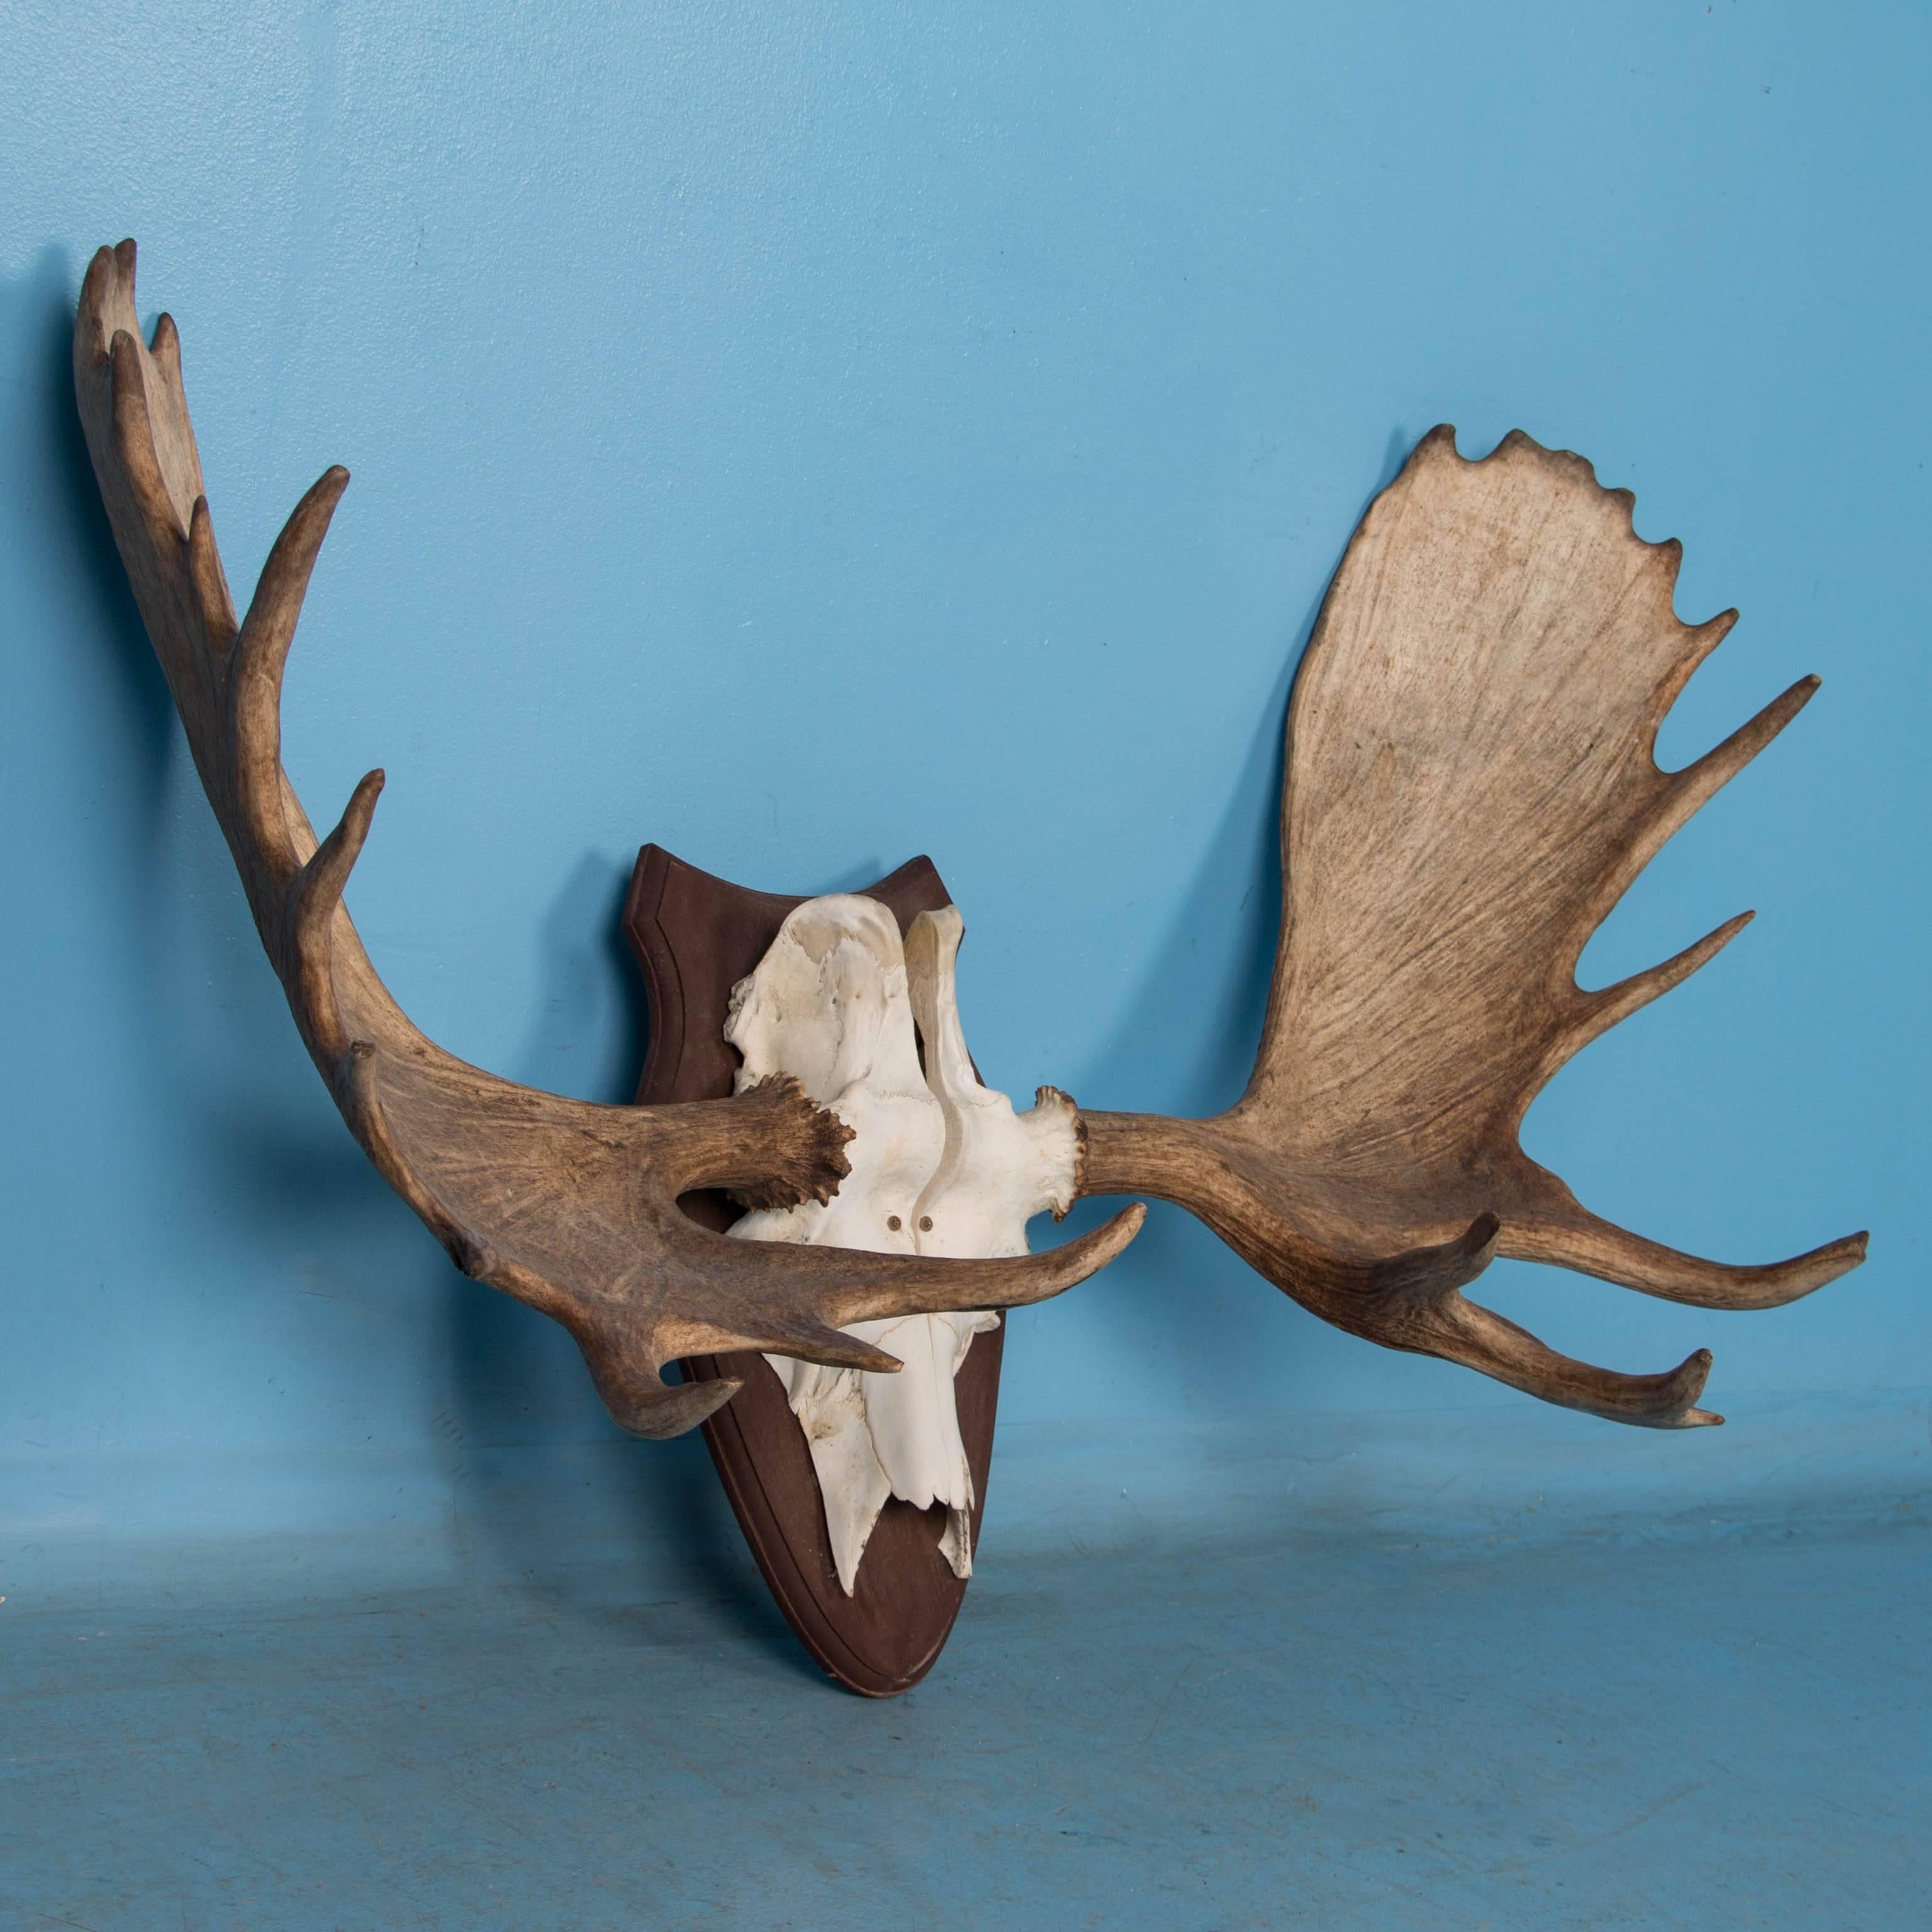 These impressive vintage moose antlers are mounted in an unusual way. The skull has been split and each half with antler attached, has been screwed to a hardwood plaque. A wonderful decorative item, the rack is ready to be hung and enjoyed. Please